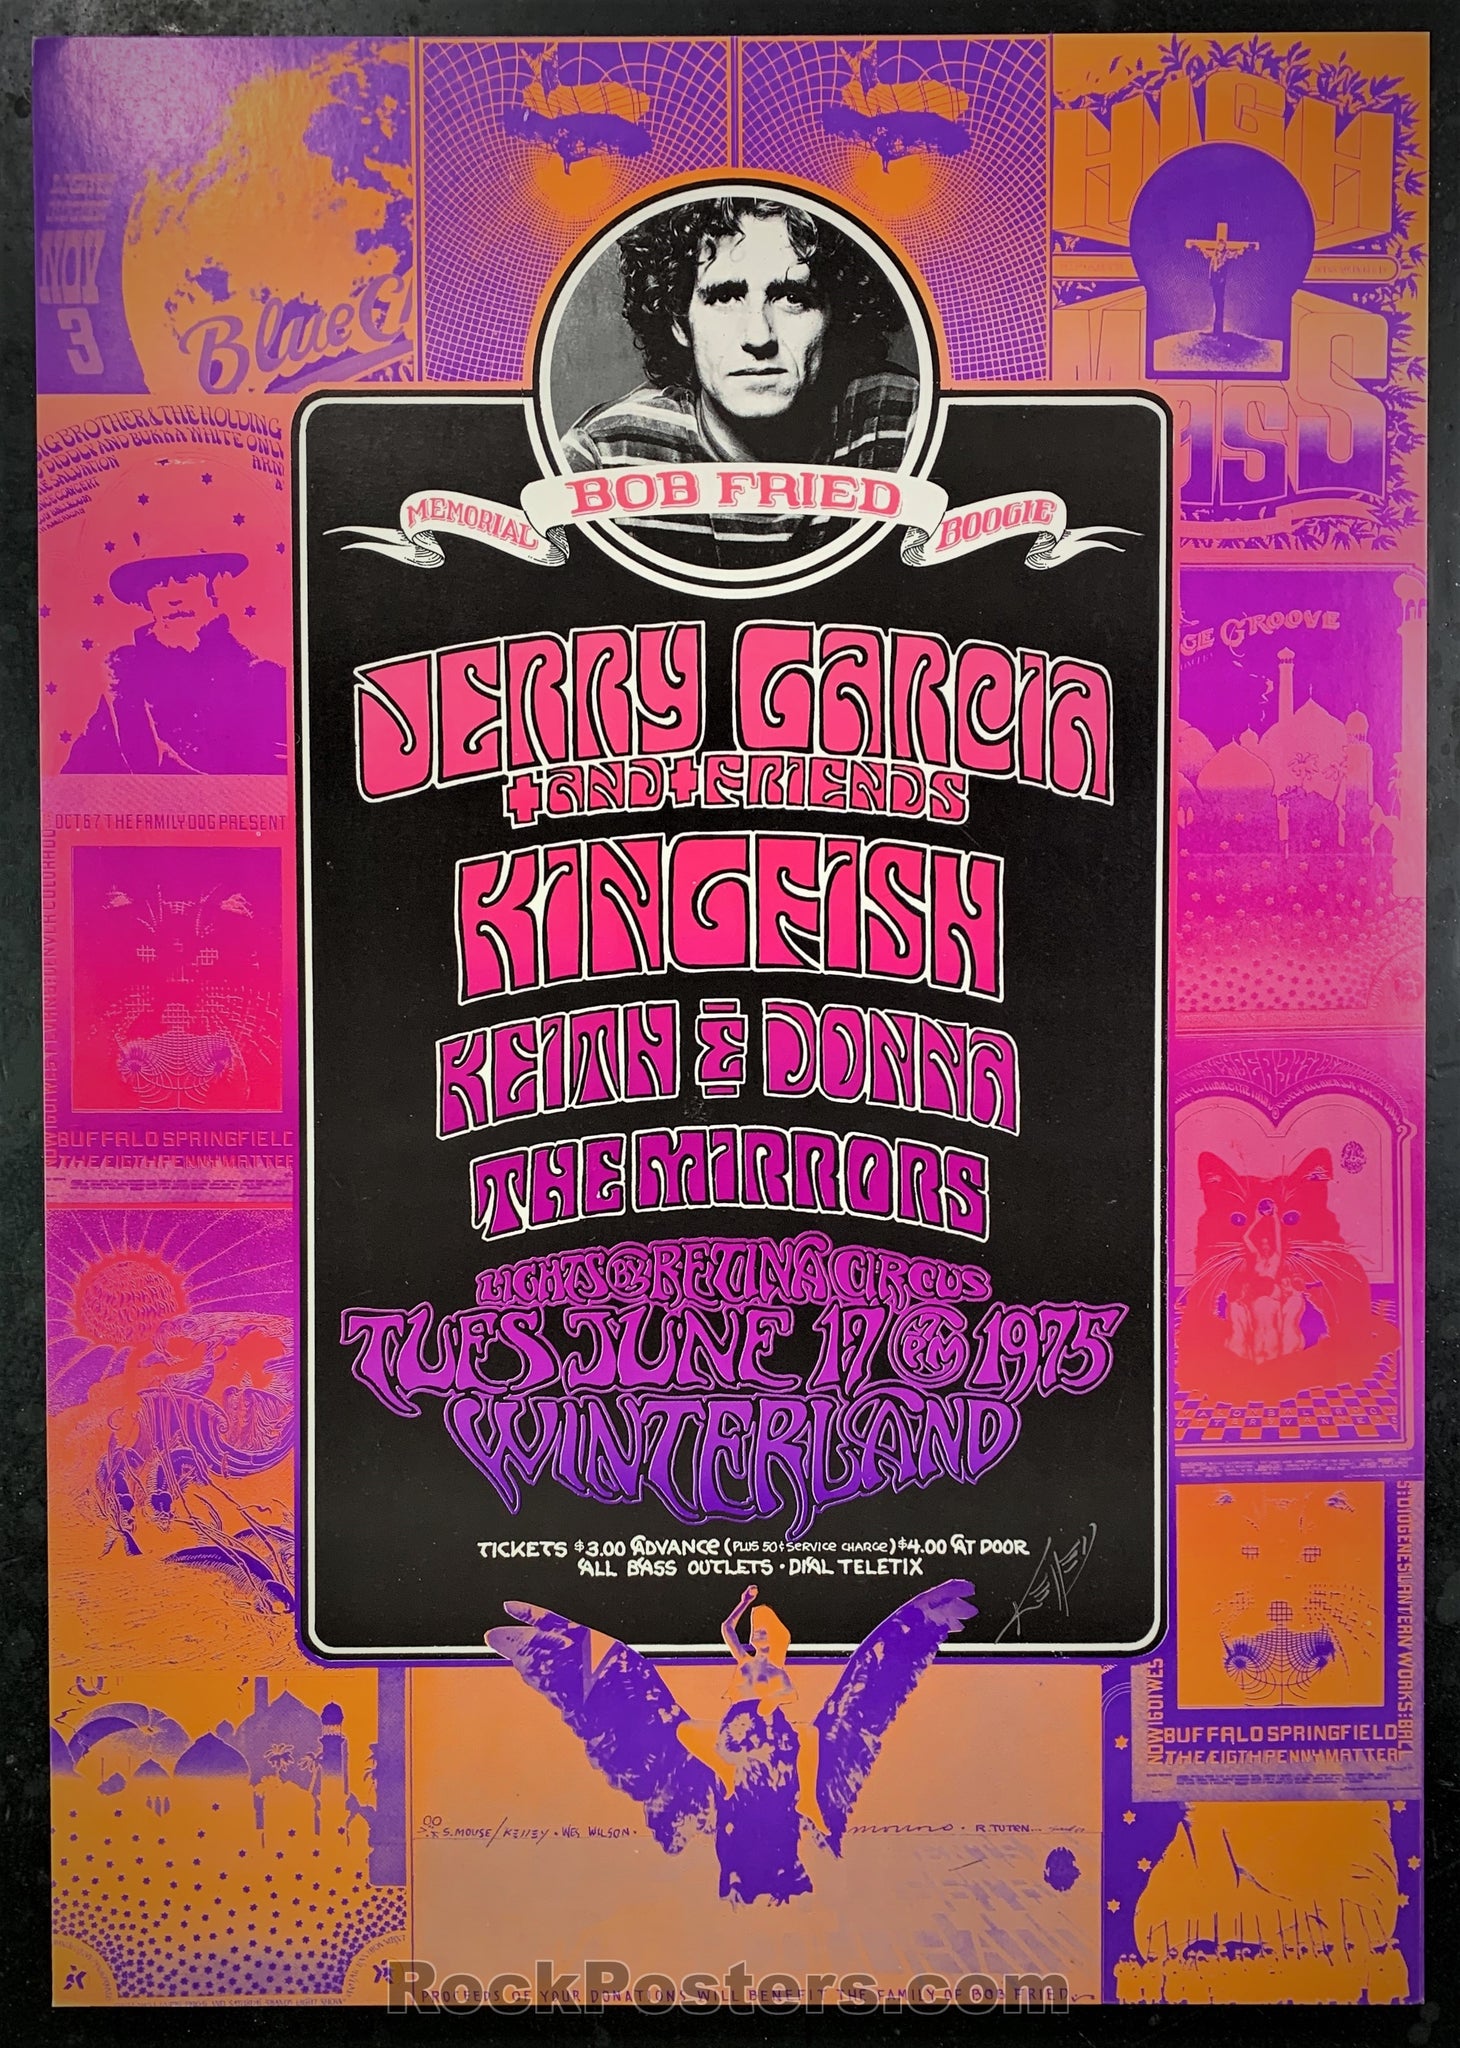 AUCTION - Alton Kelley Collection - Bob Fried Memorial Boogie - 1975 Poster - Kelley Signed - Winterland - Near Mint Minus